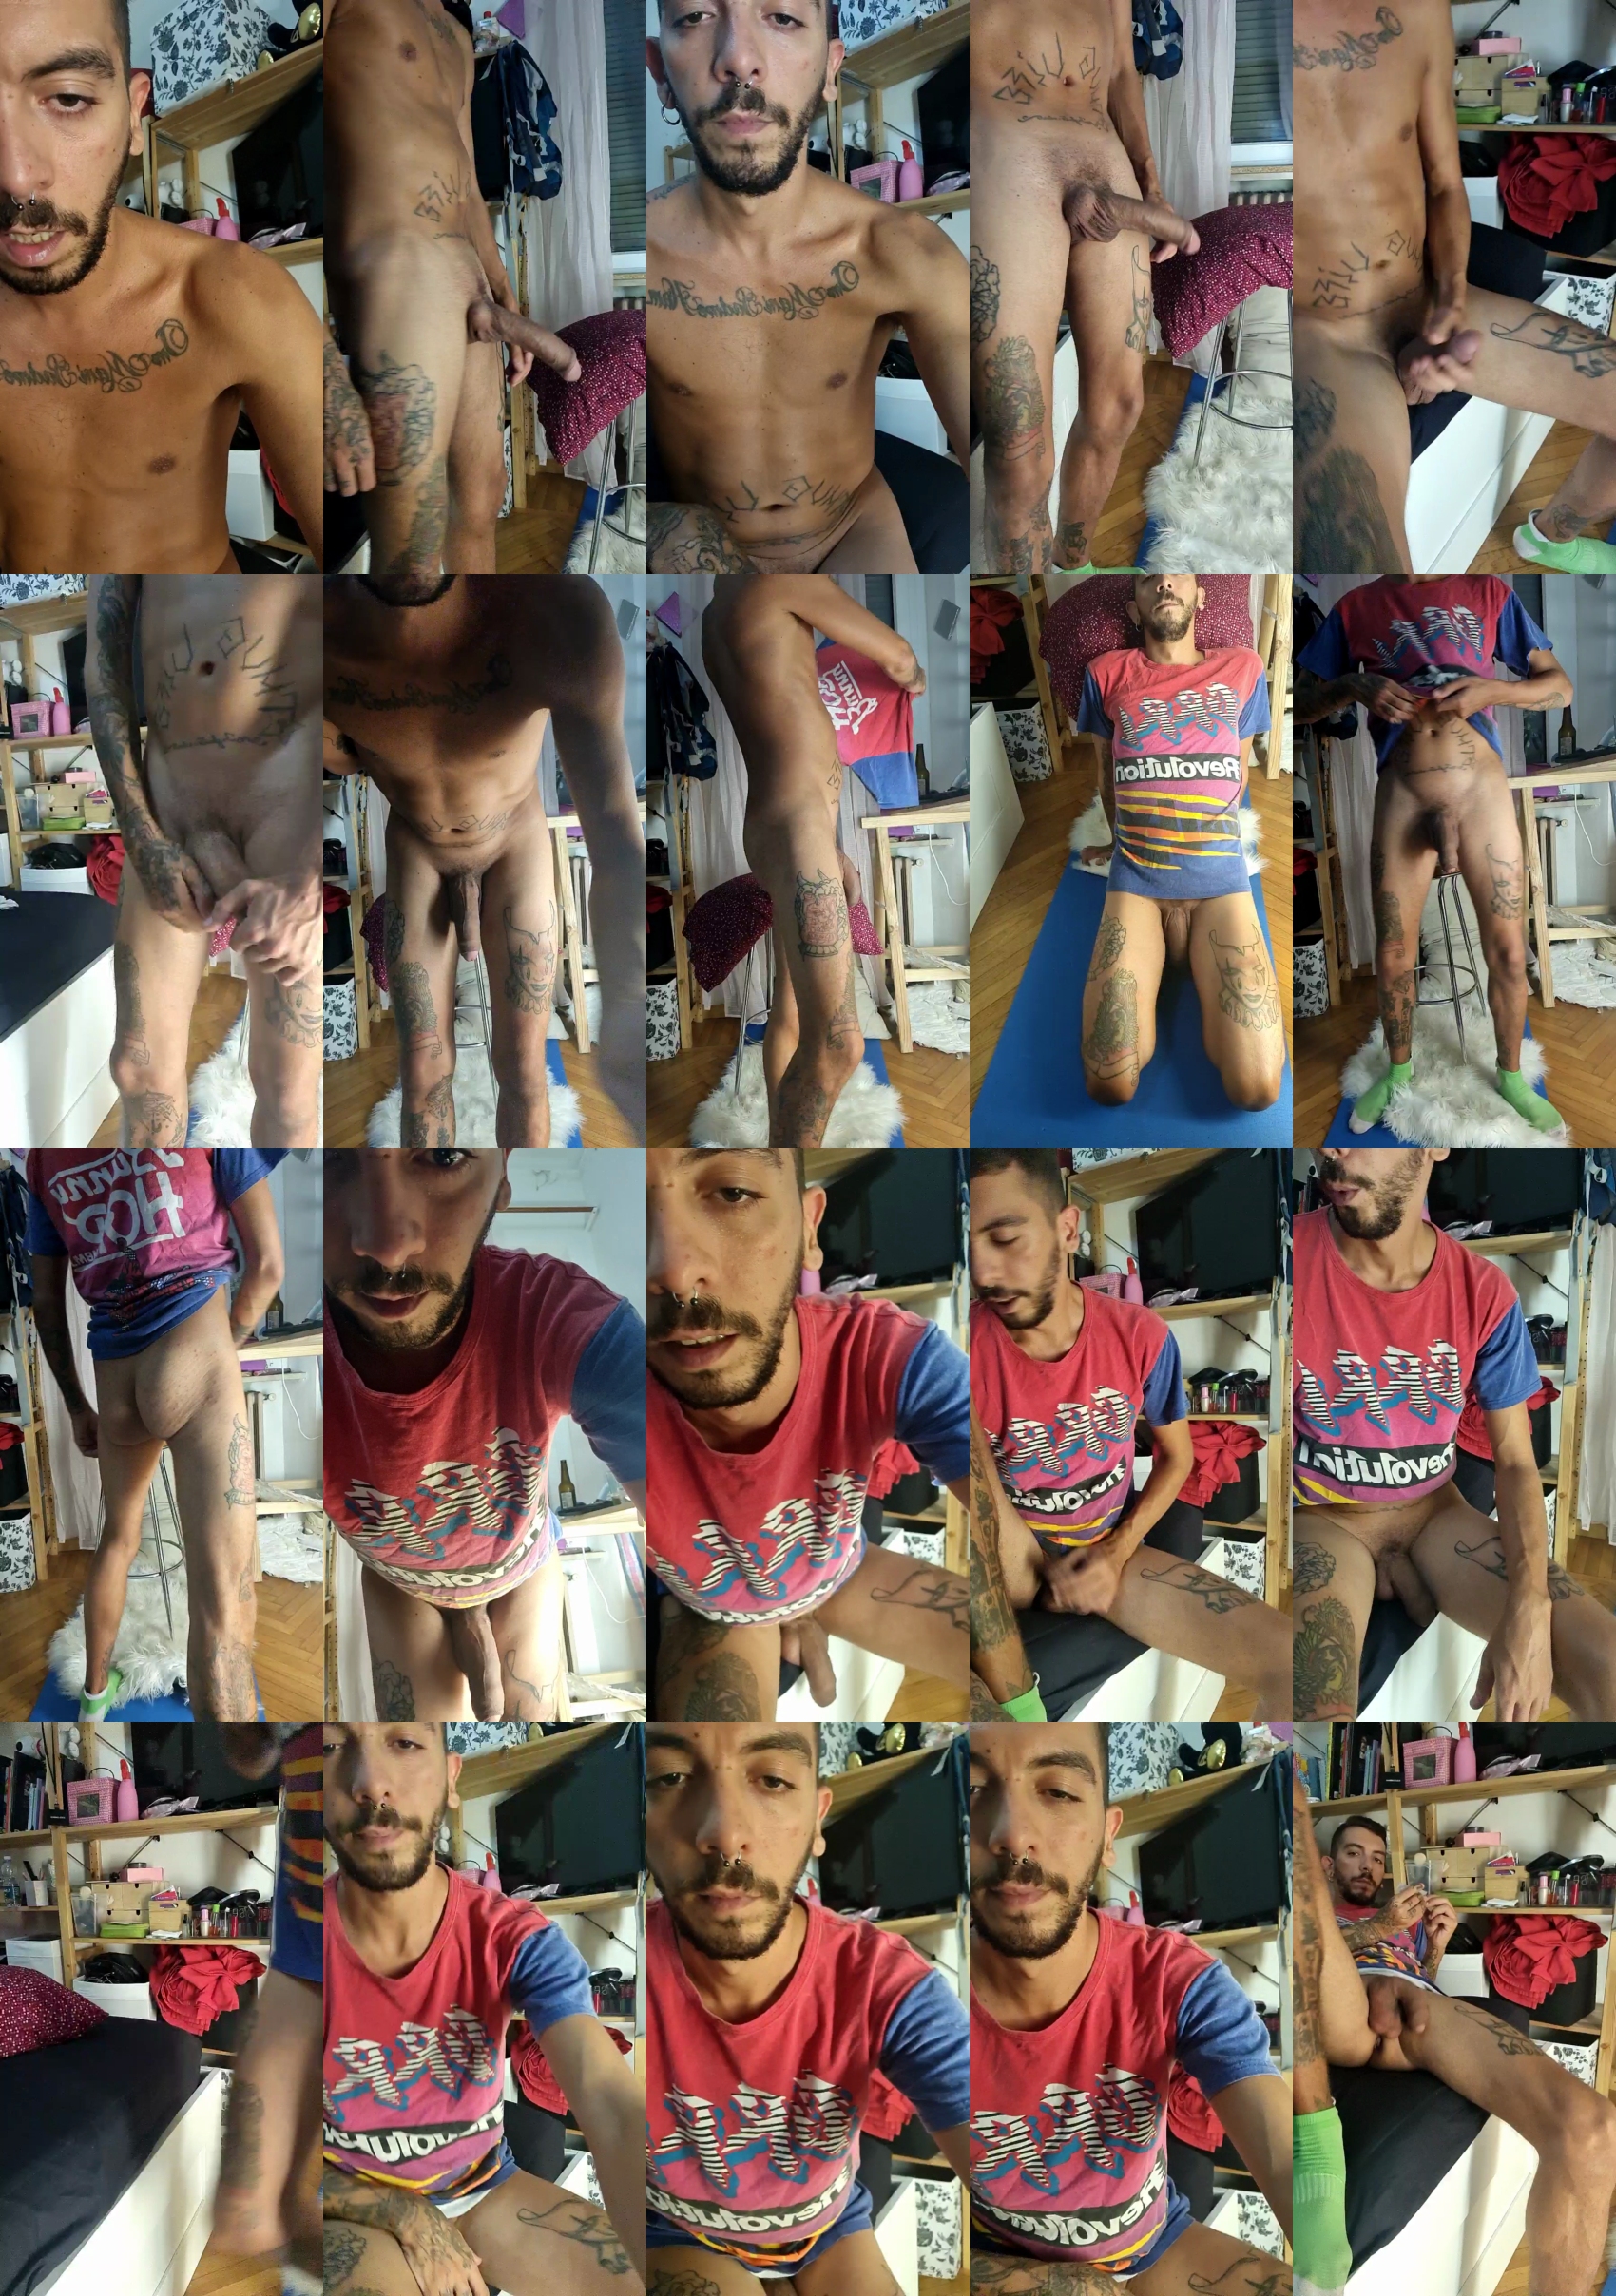 themadHatter90  14-09-2022 Recorded Video ass